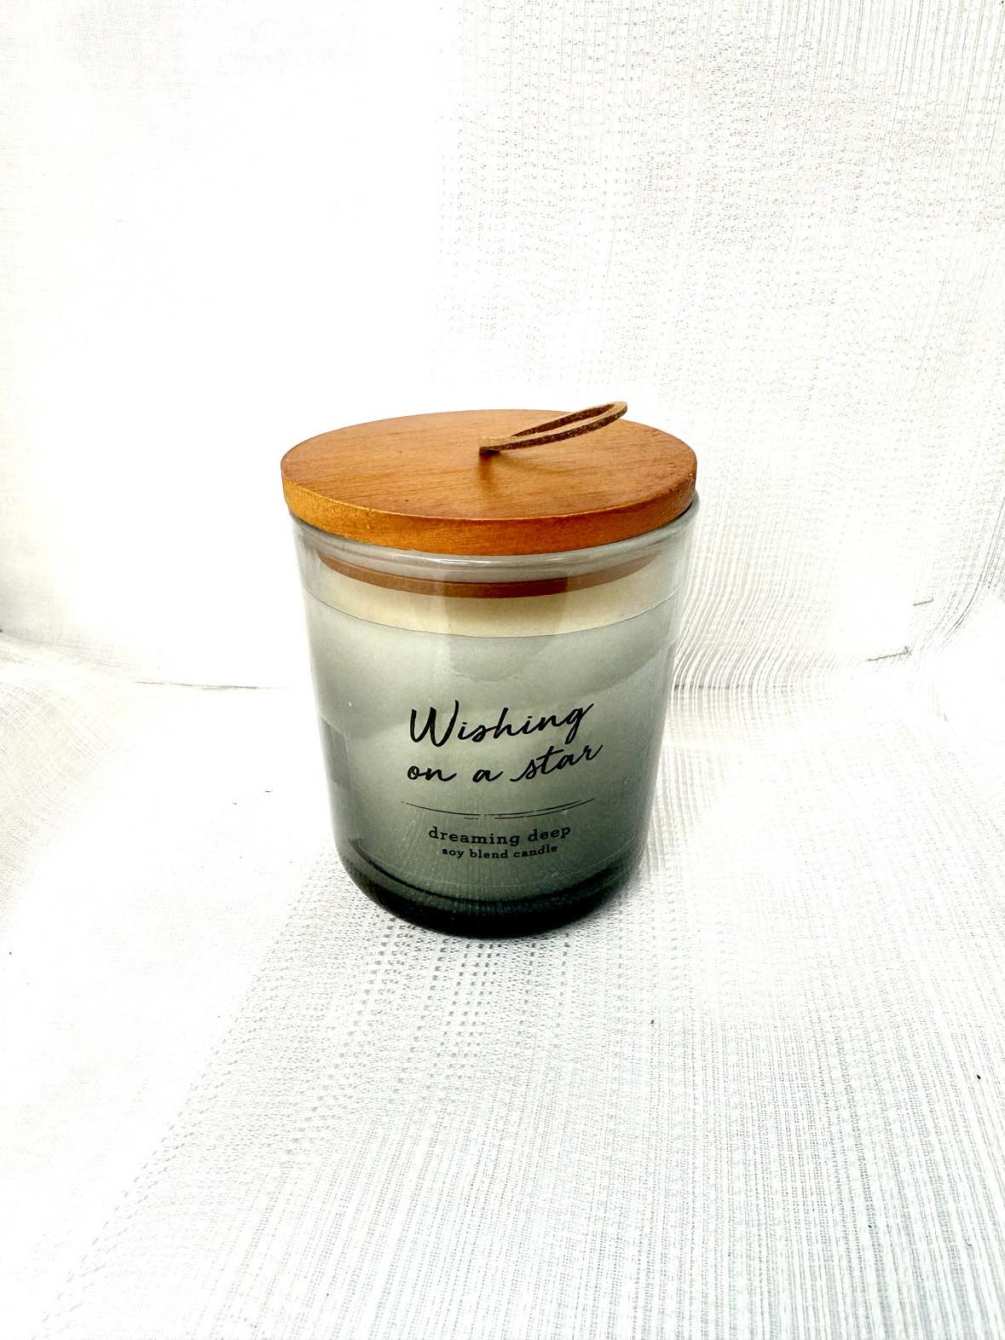 Dreaming Deep scented soy blend candle.
Lid has quote on inside of candle-